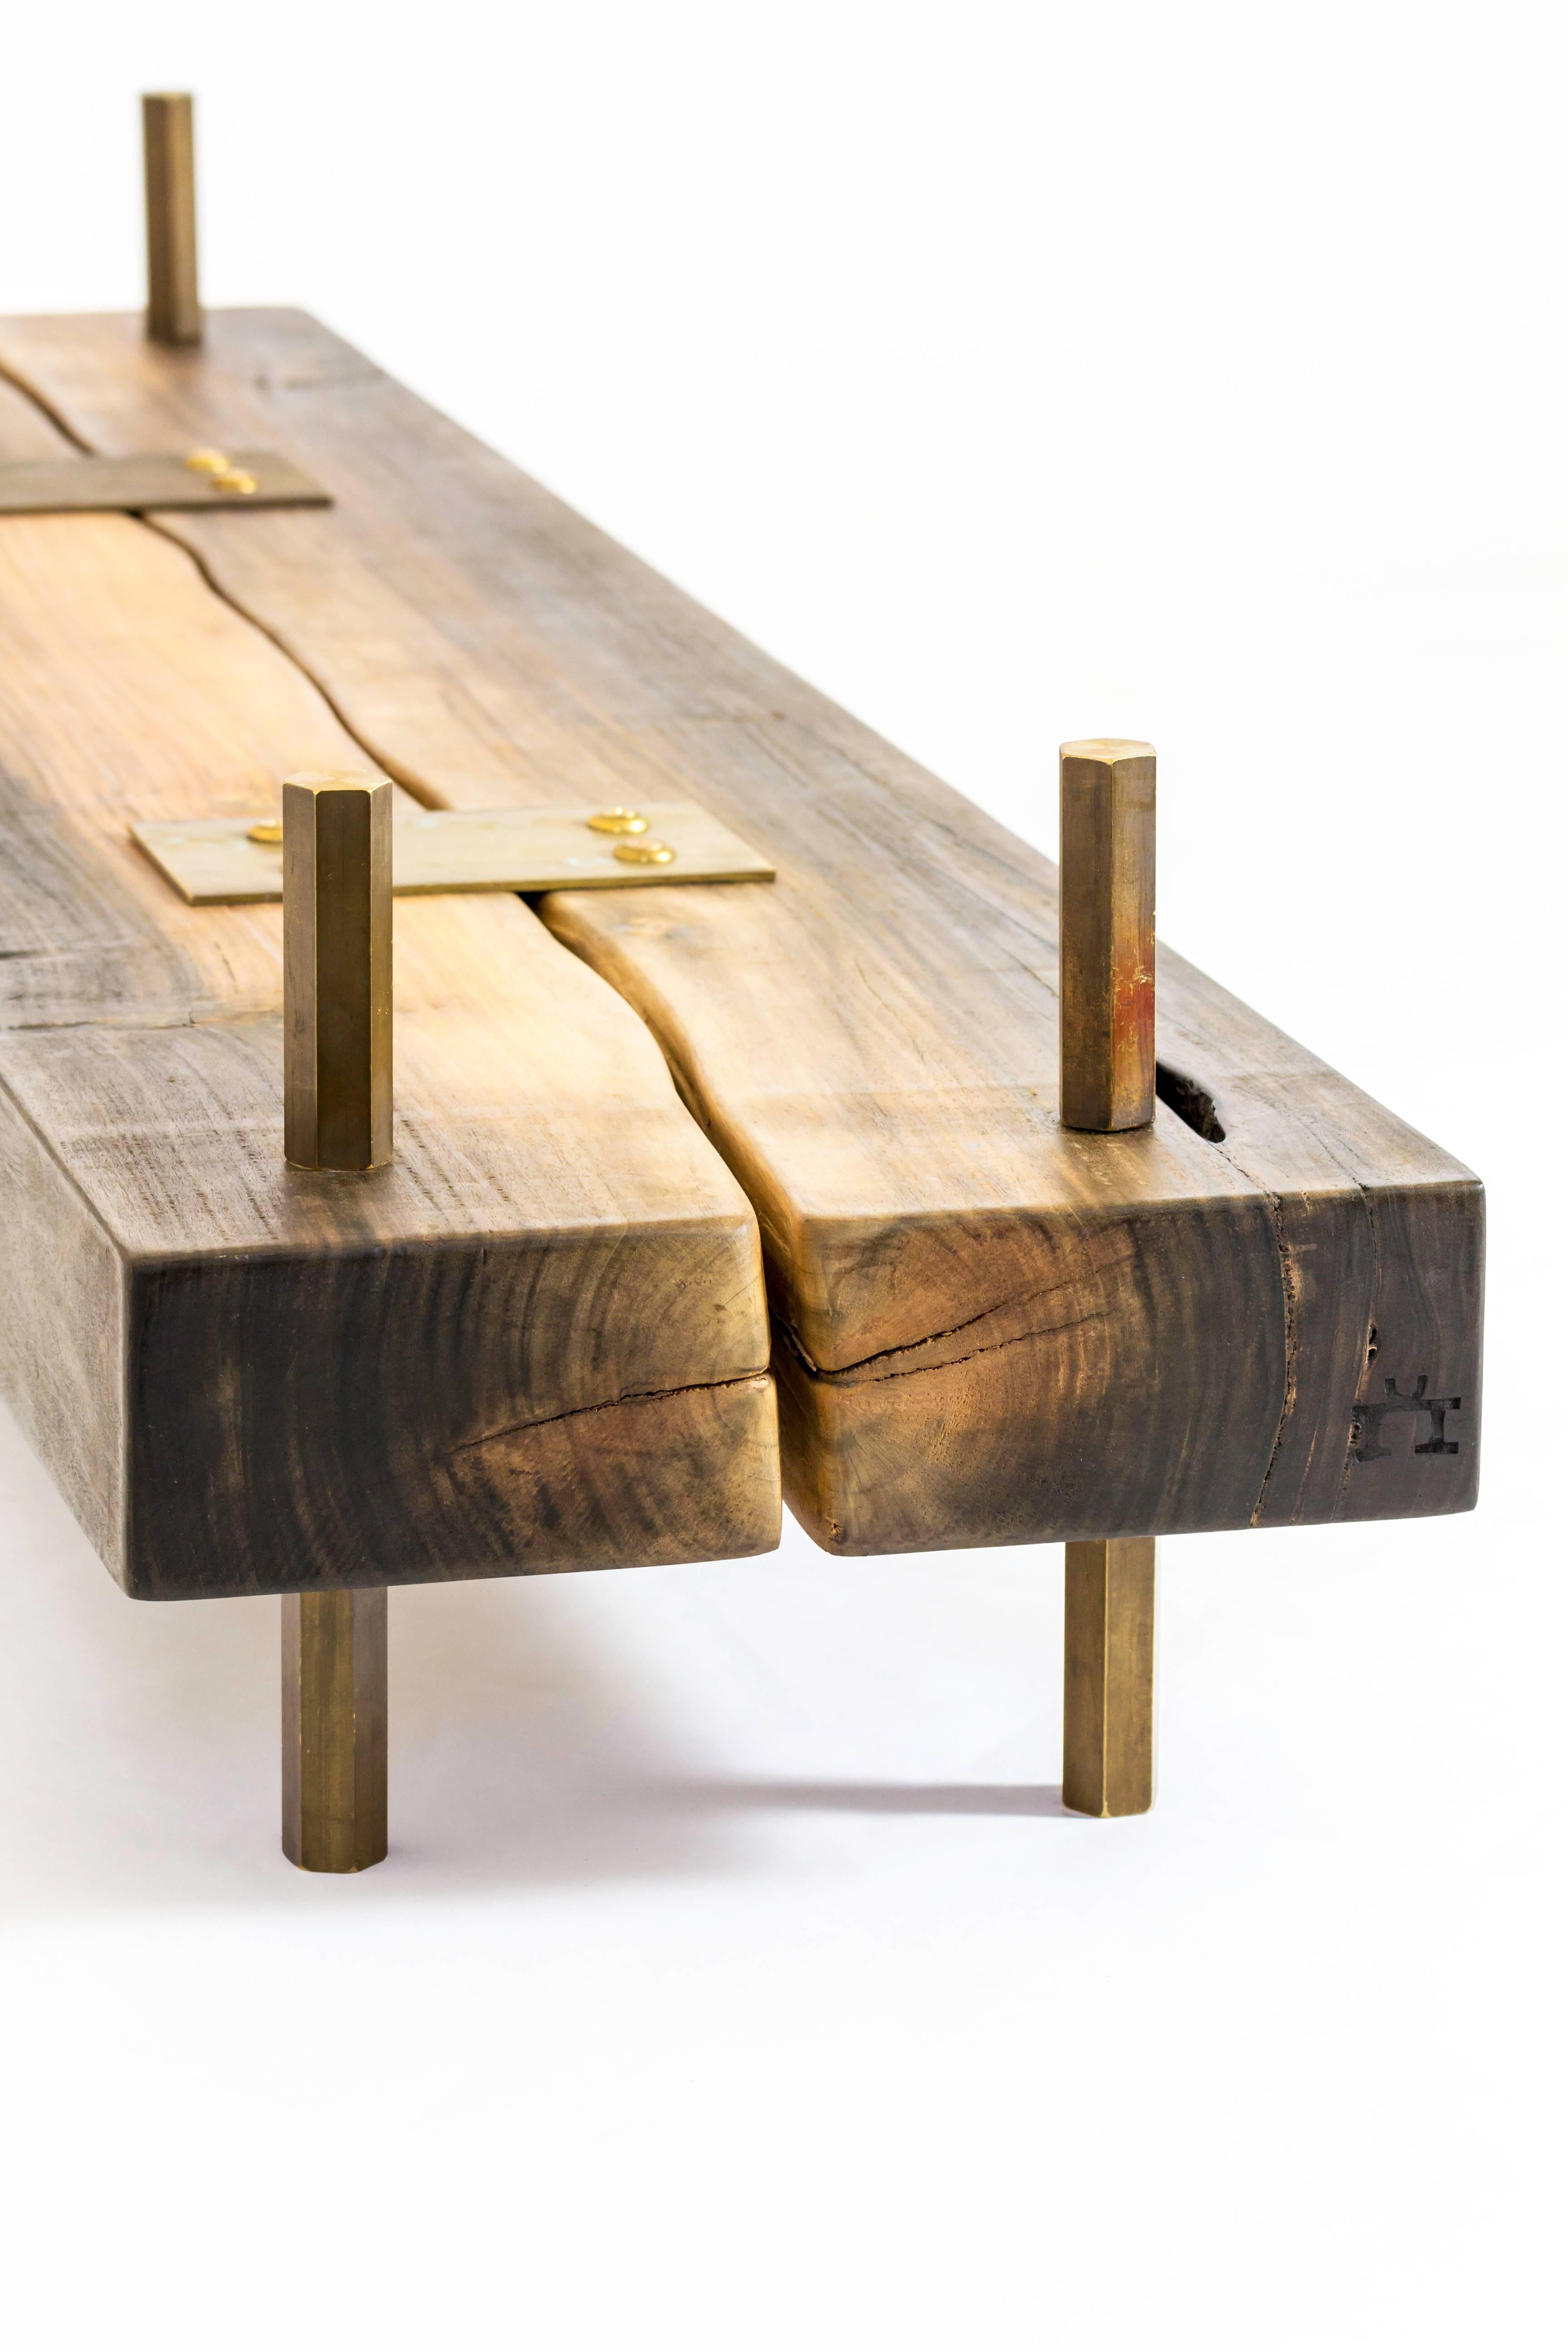 Dos Hijos unites two beautiful rectangular lengths of rescued Mahoe wood in a contemporary connection, top in glass. The wood texture and tone in contrast with golden brass legs and details create a beautiful yet sophisticated piece. 

Rescued in